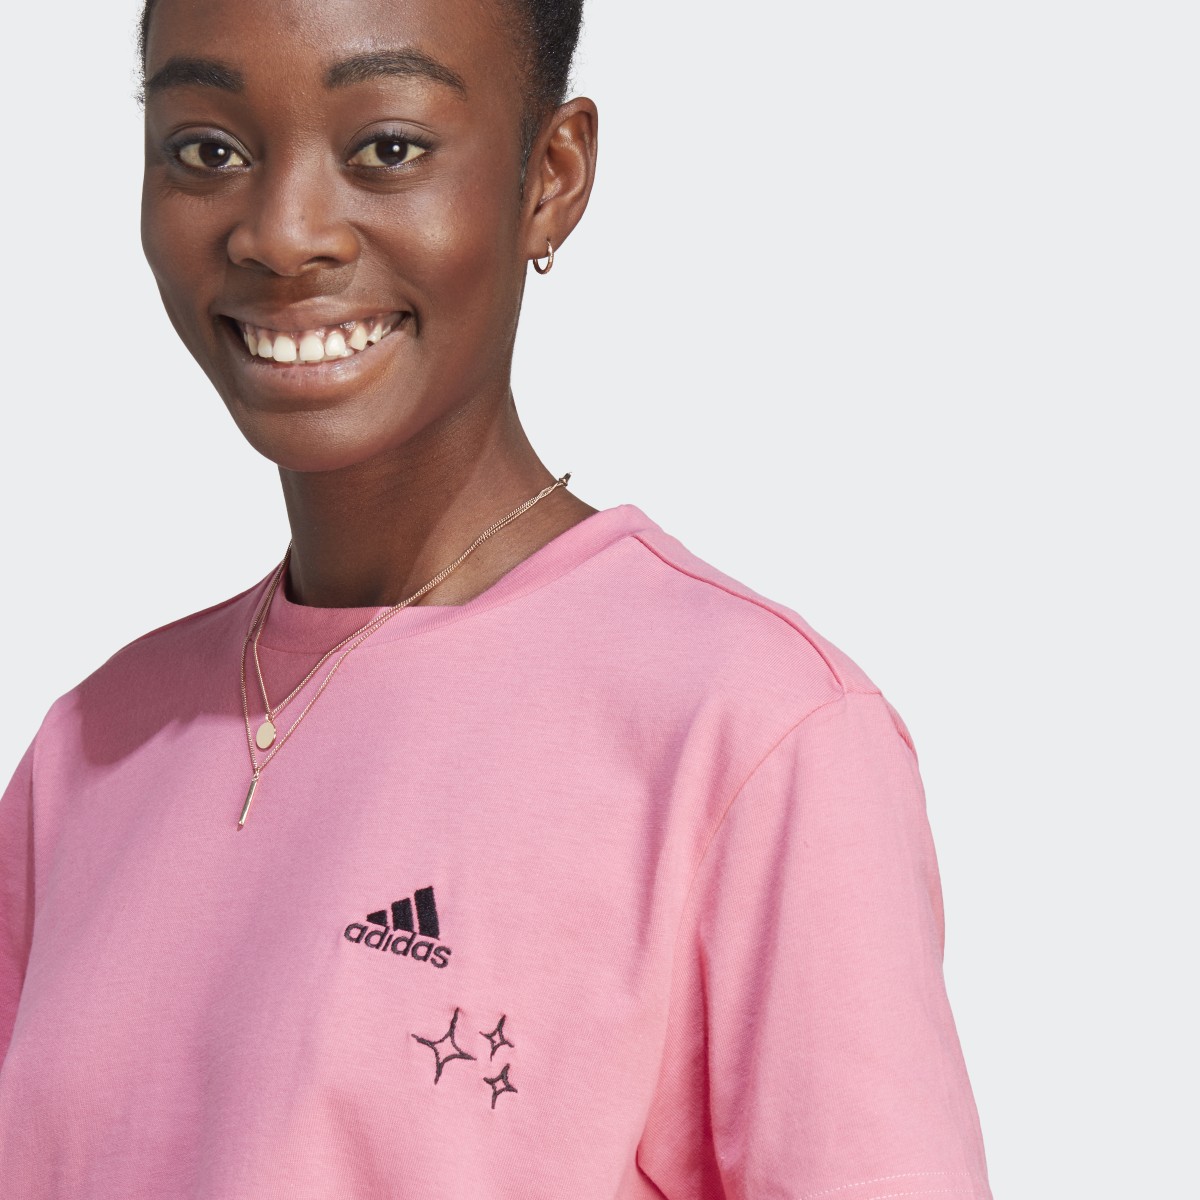 Adidas Scribble Embroidery Crop T-Shirt. 9